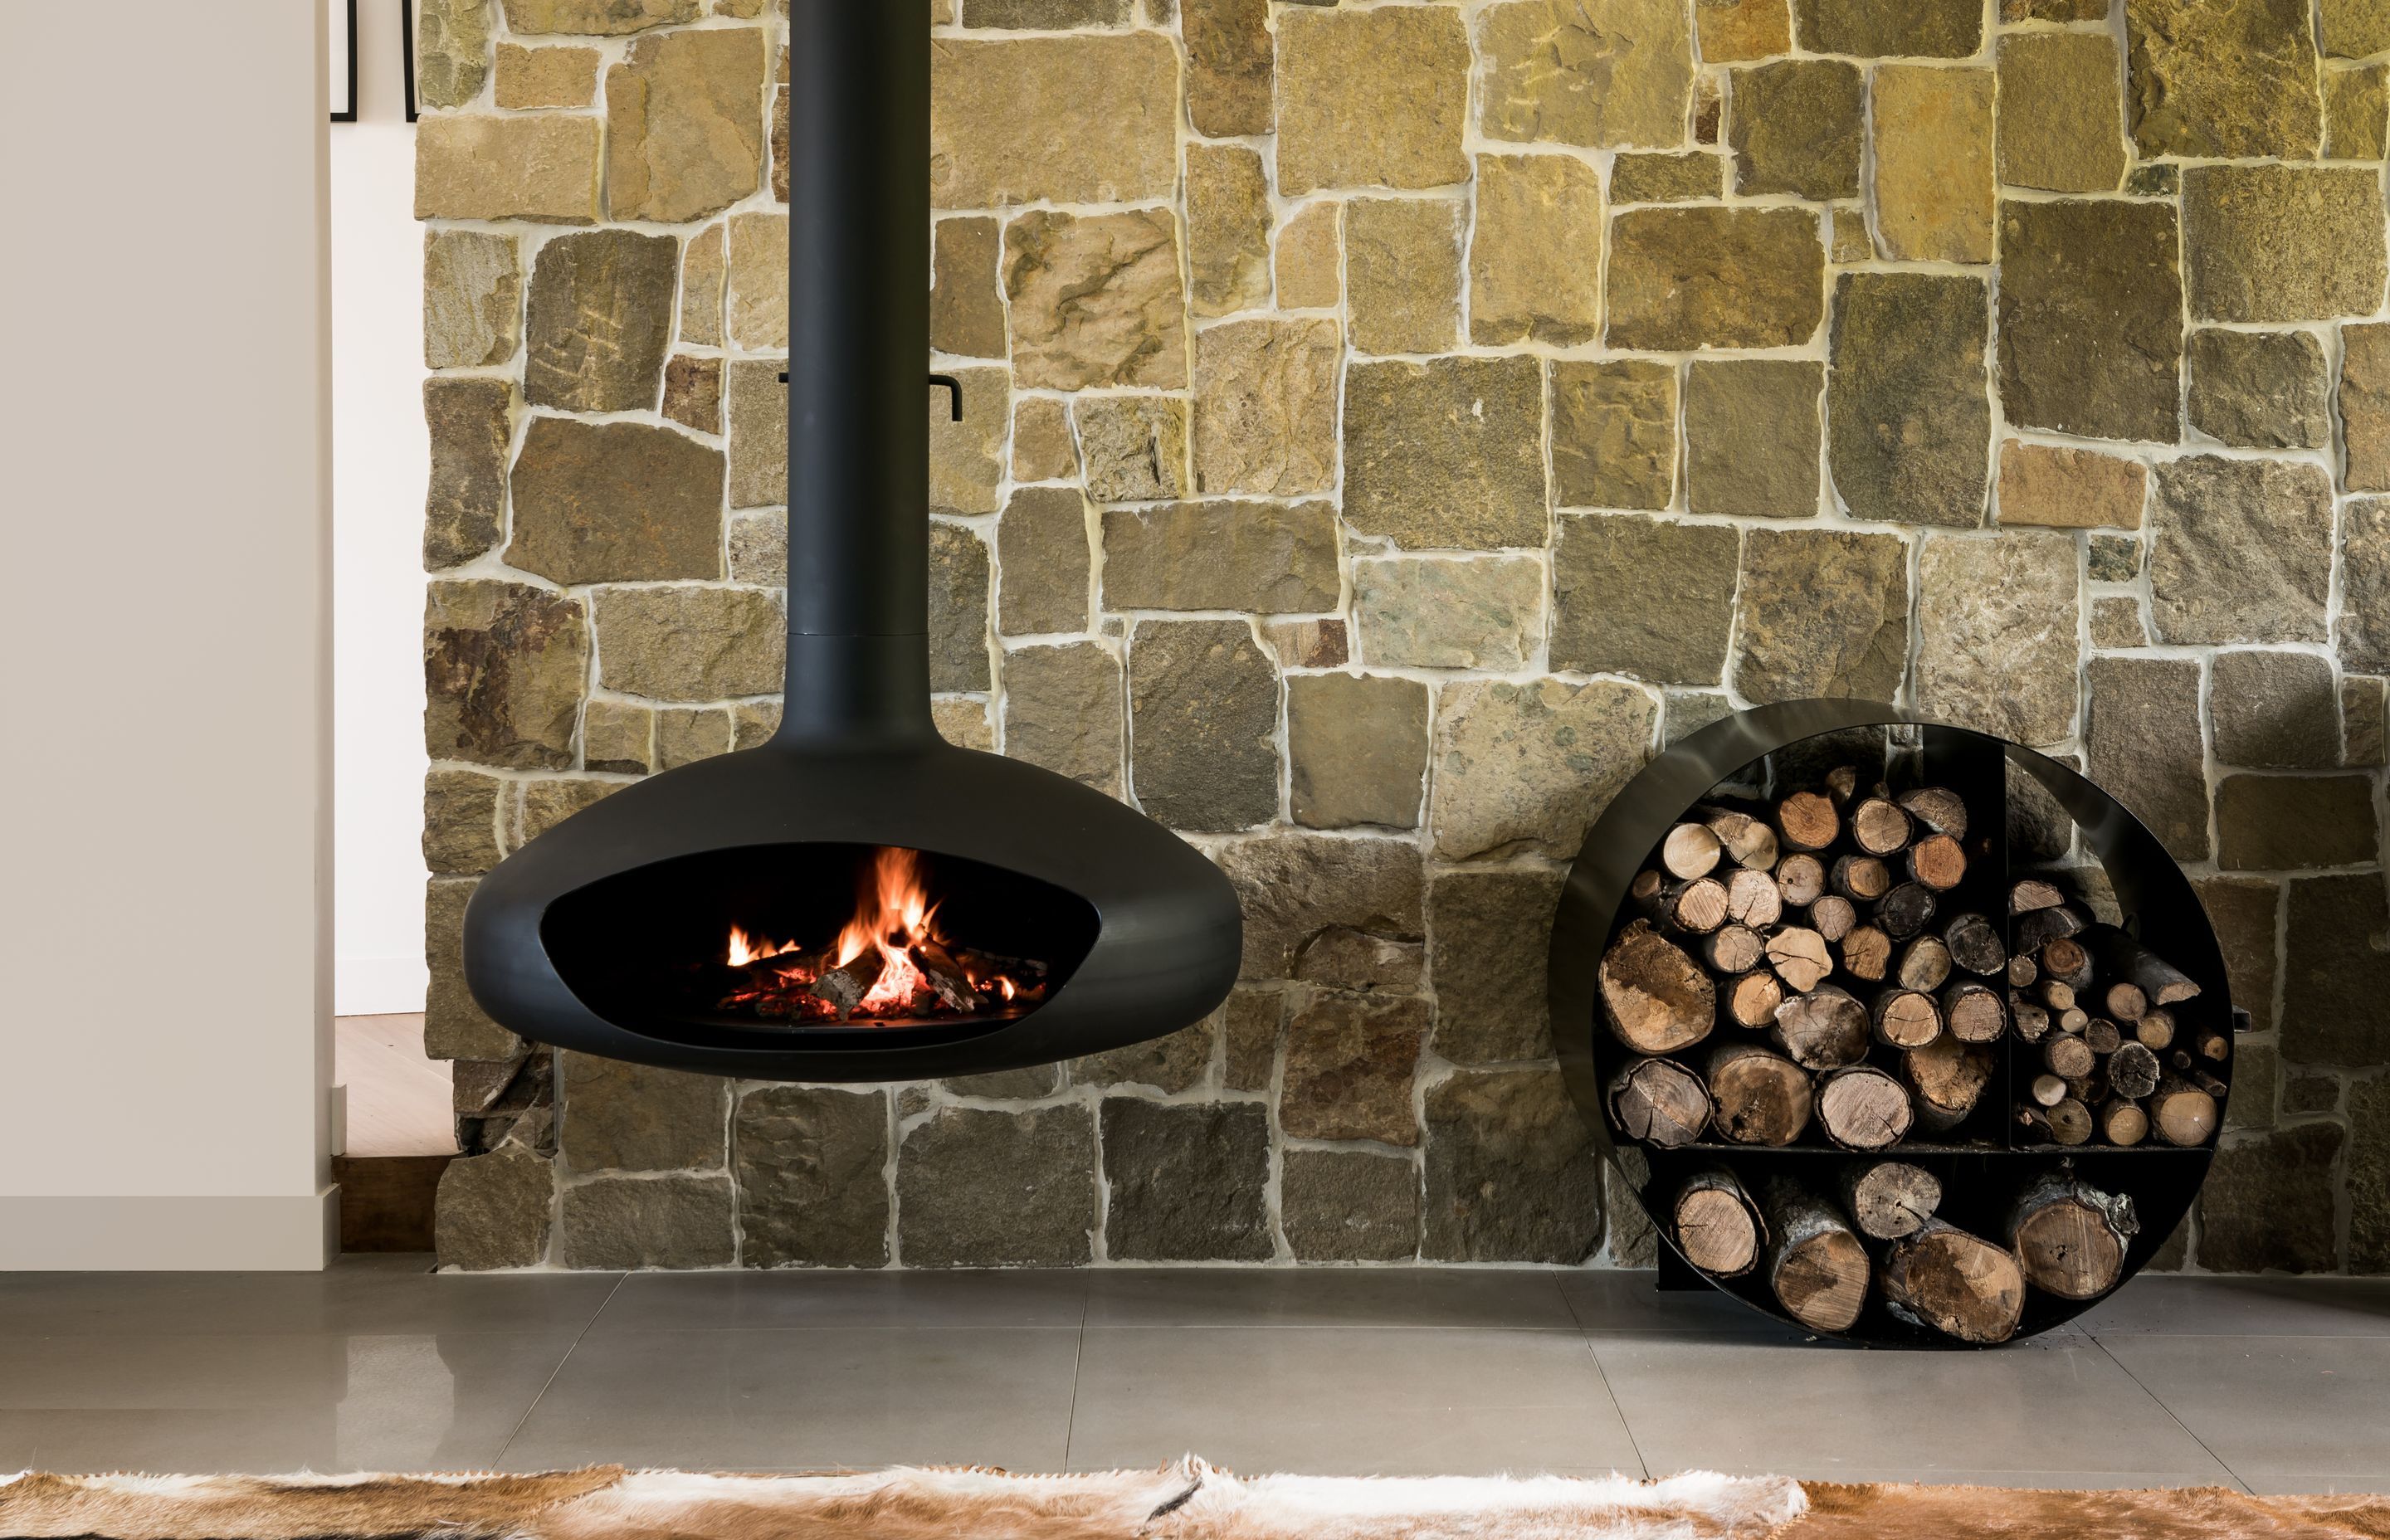 In the Aurora range, the Hearth model is popular for its curved, sculptural aesthetic